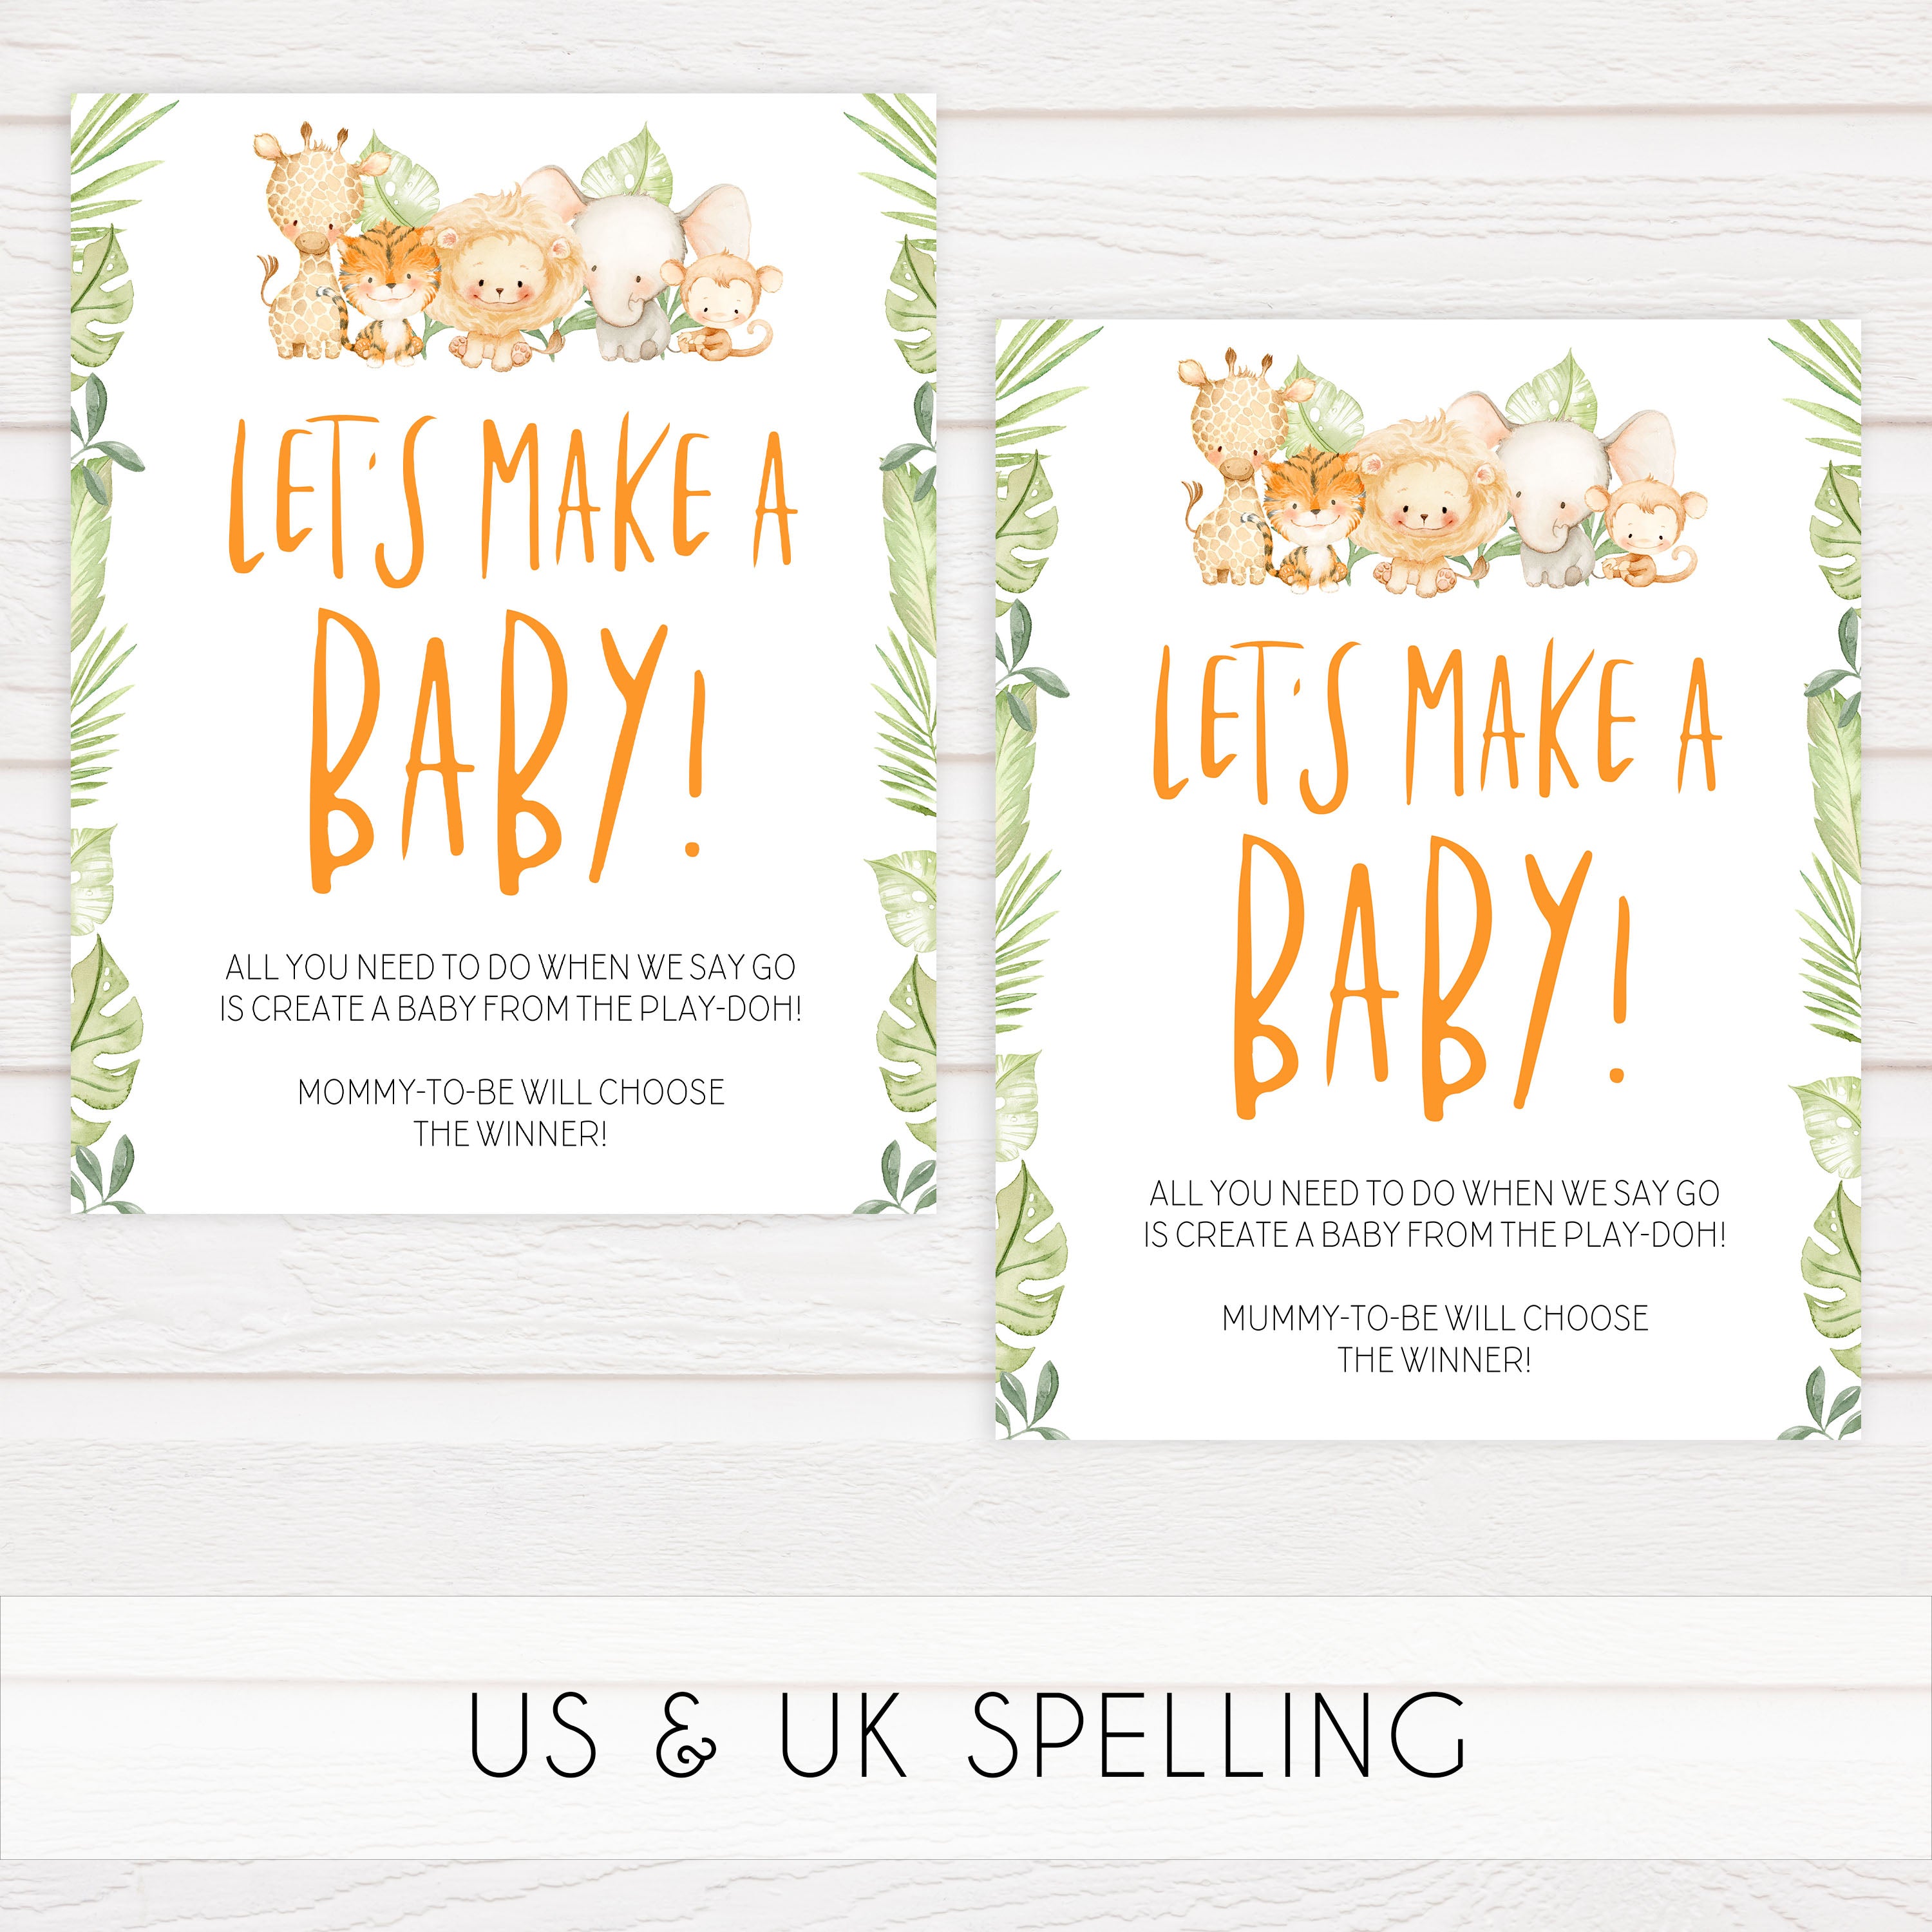 lets make a baby game, Printable baby shower games, safari animals baby games, baby shower games, fun baby shower ideas, top baby shower ideas, safari animals baby shower, baby shower games, fun baby shower ideas